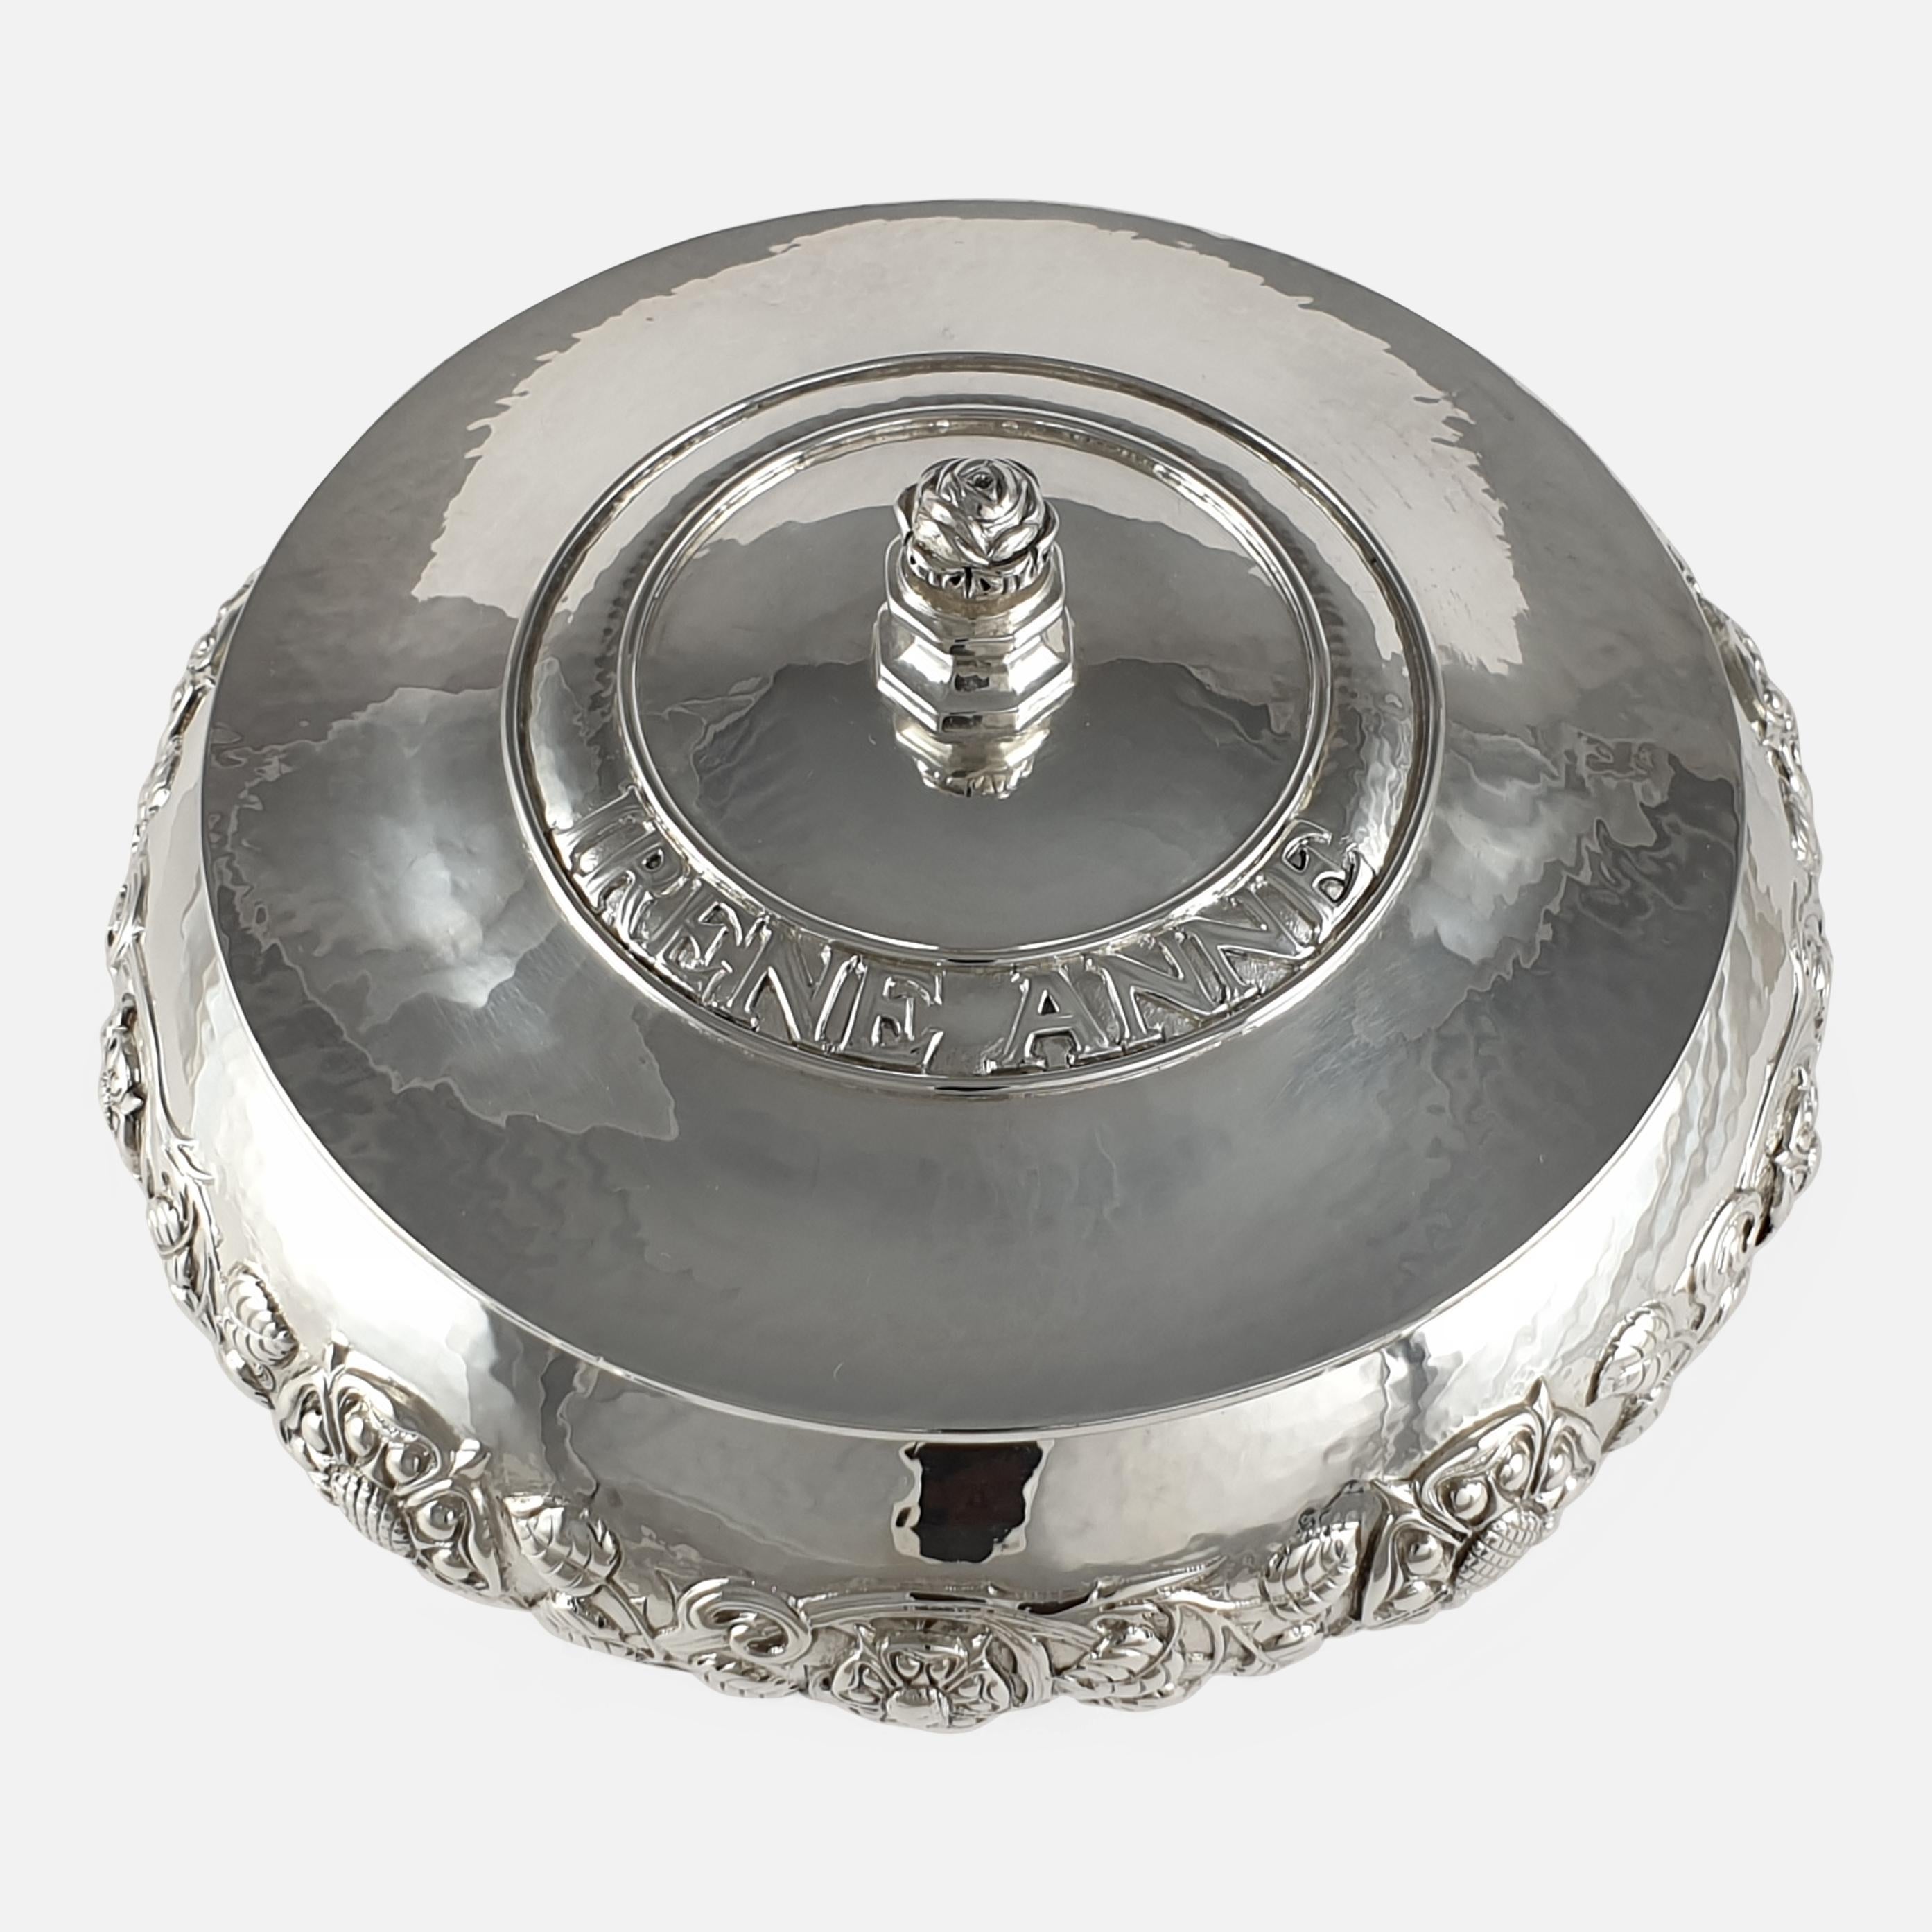 British Arts & Crafts Sterling Silver Bowl and Cover, Omar Ramsden, London, 1934